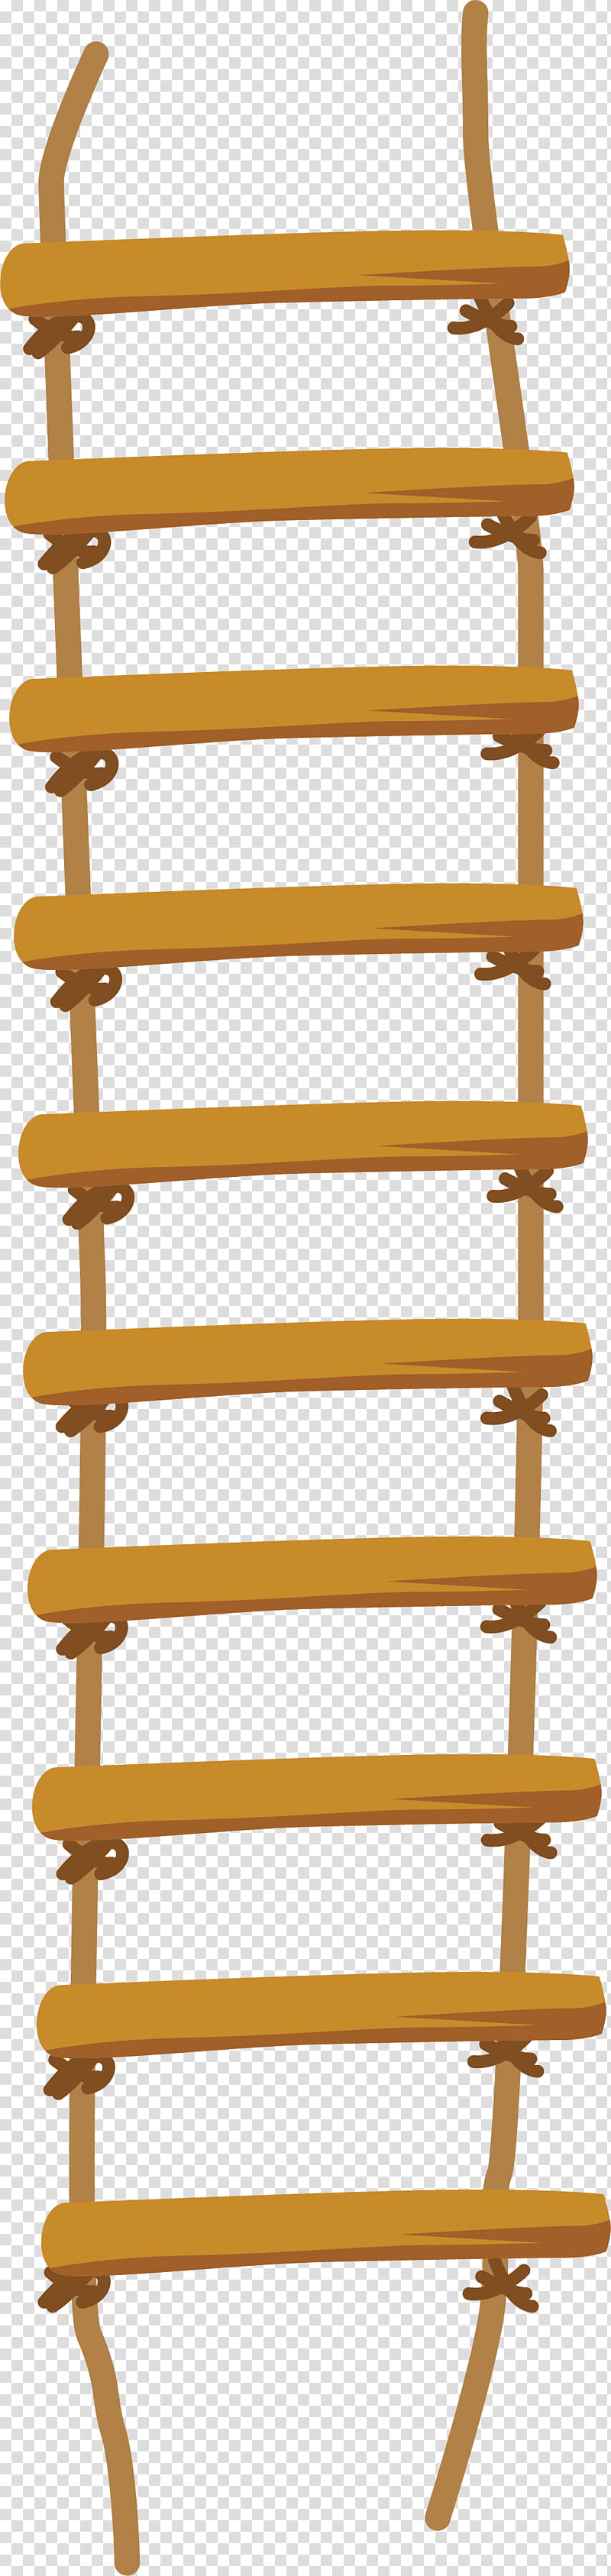 Ladder, Rope, Television, Repstege, Wood, Advertising, Hemp, Line transparent background PNG clipart